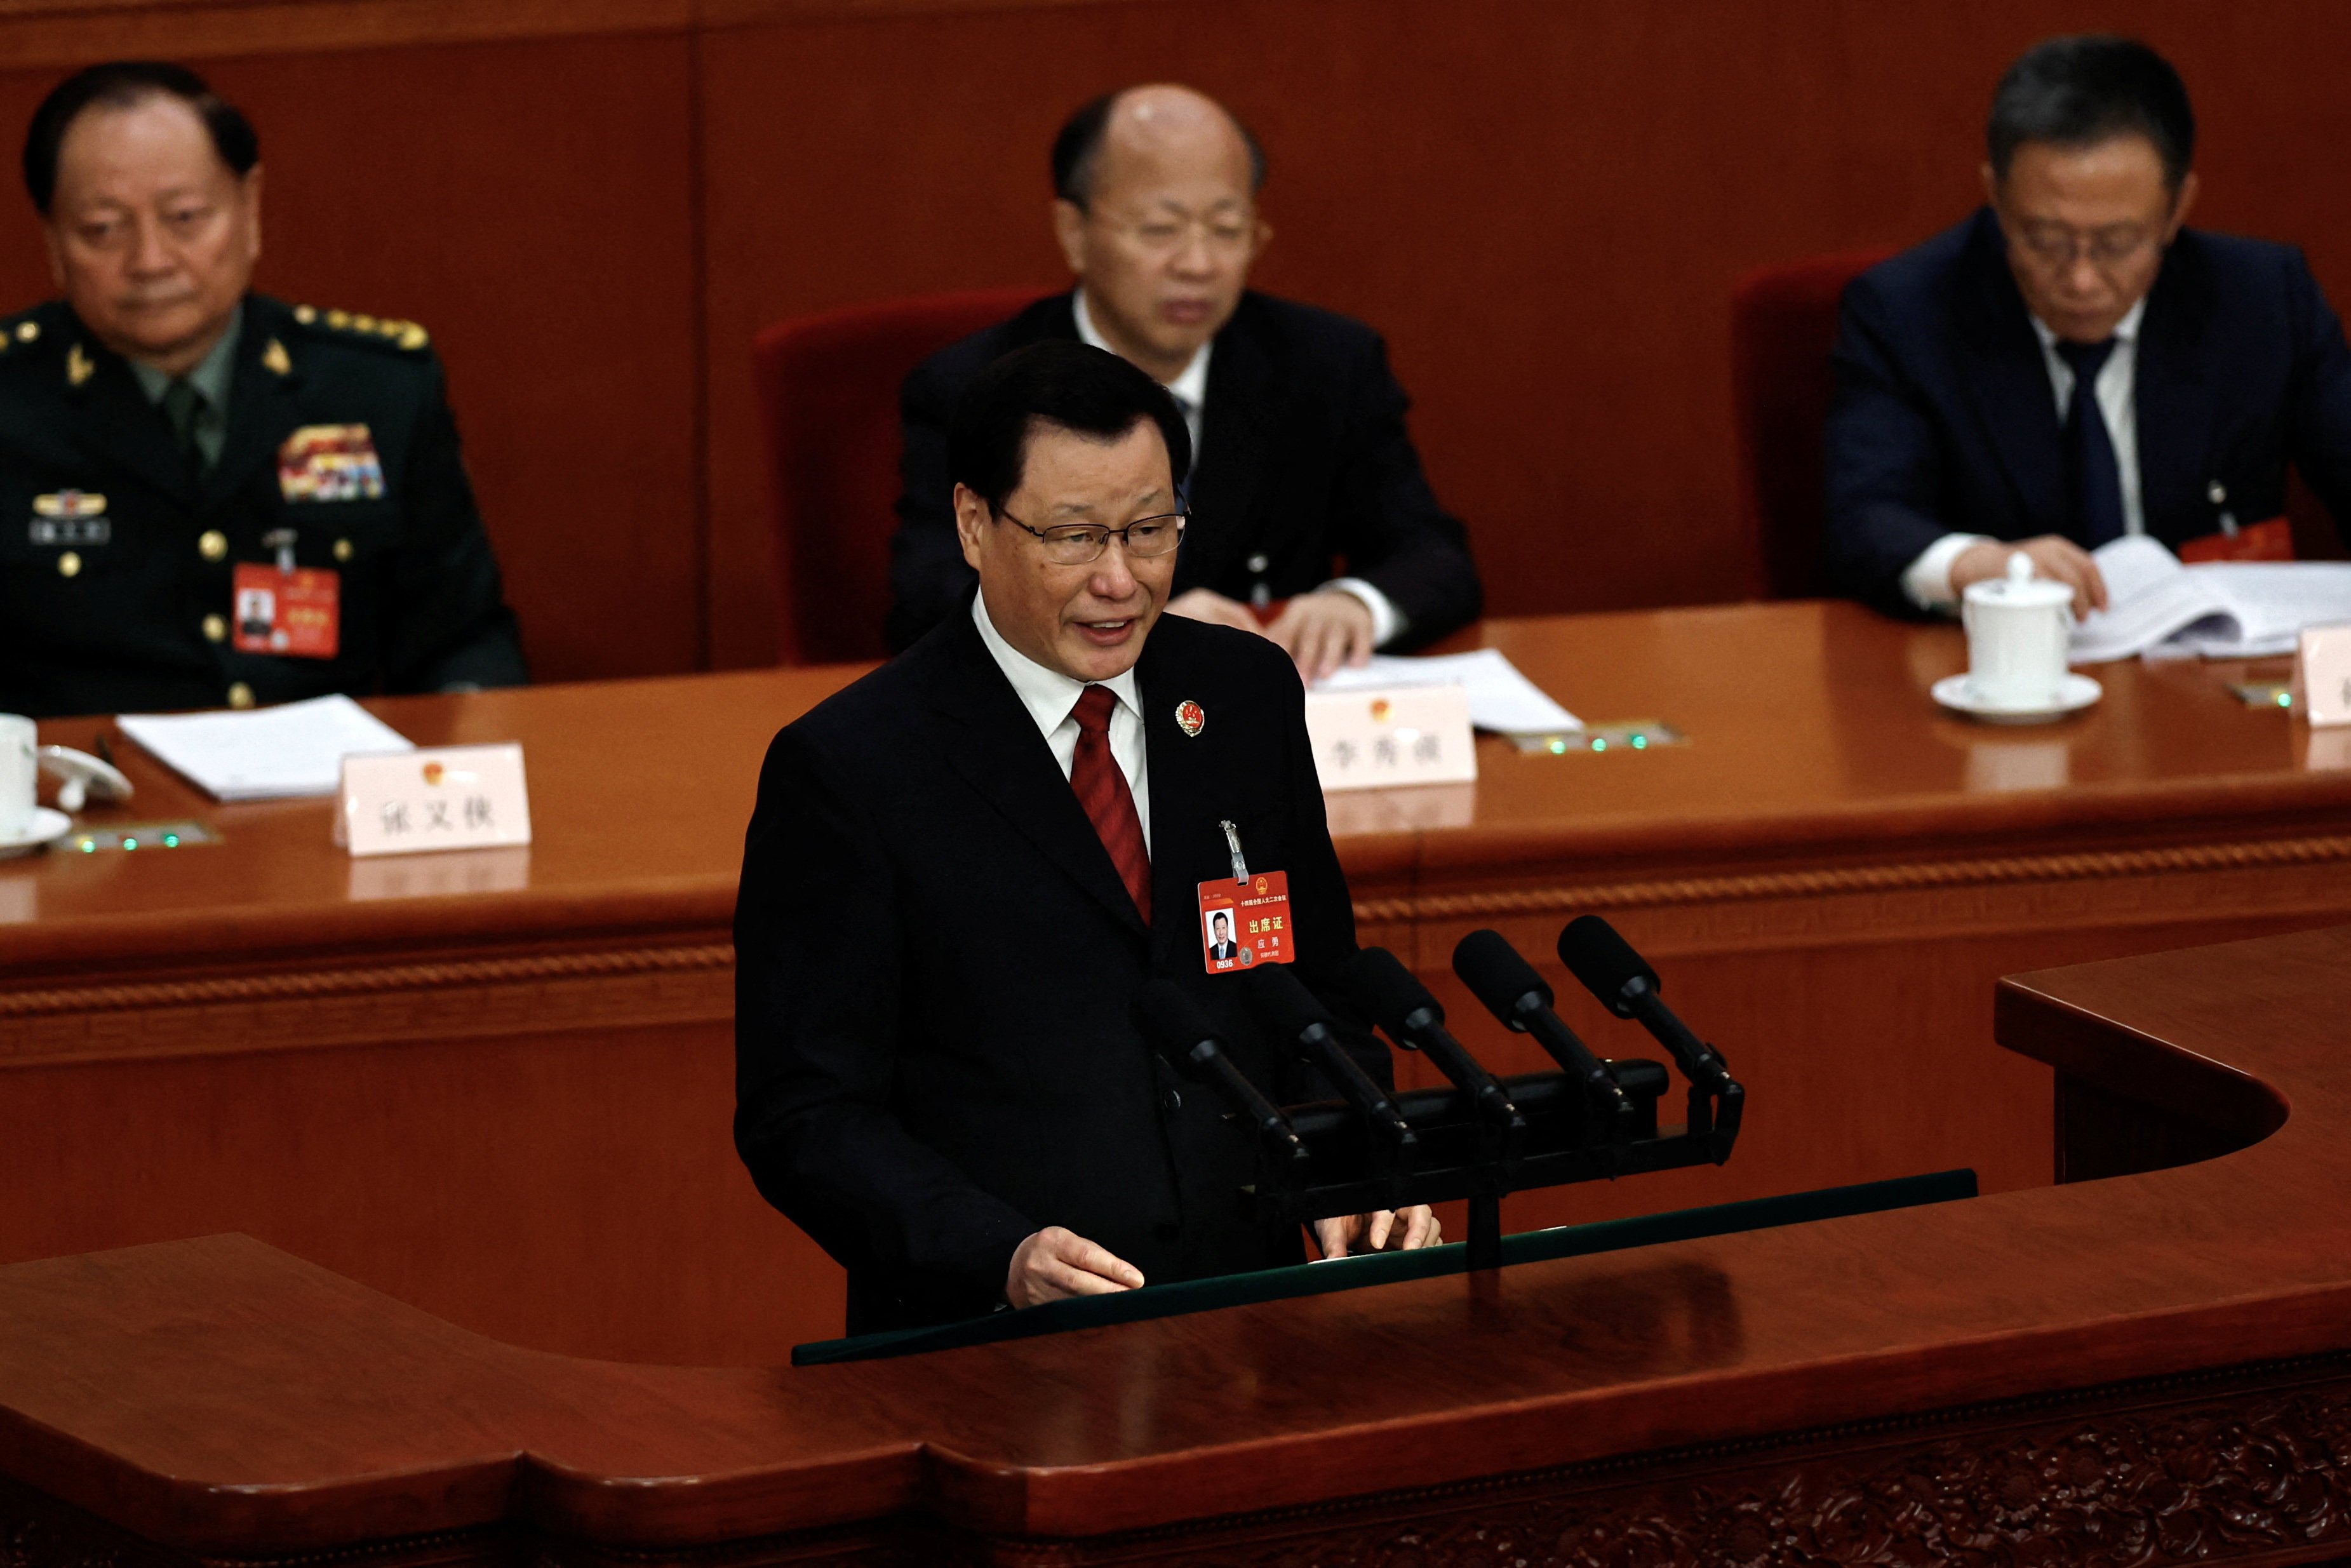 Ying Yong, prosecutor-general of the Supreme People’s Procuratorate, addresses the  National People’s Congress, in Beijing on Friday. Photo: Reuters